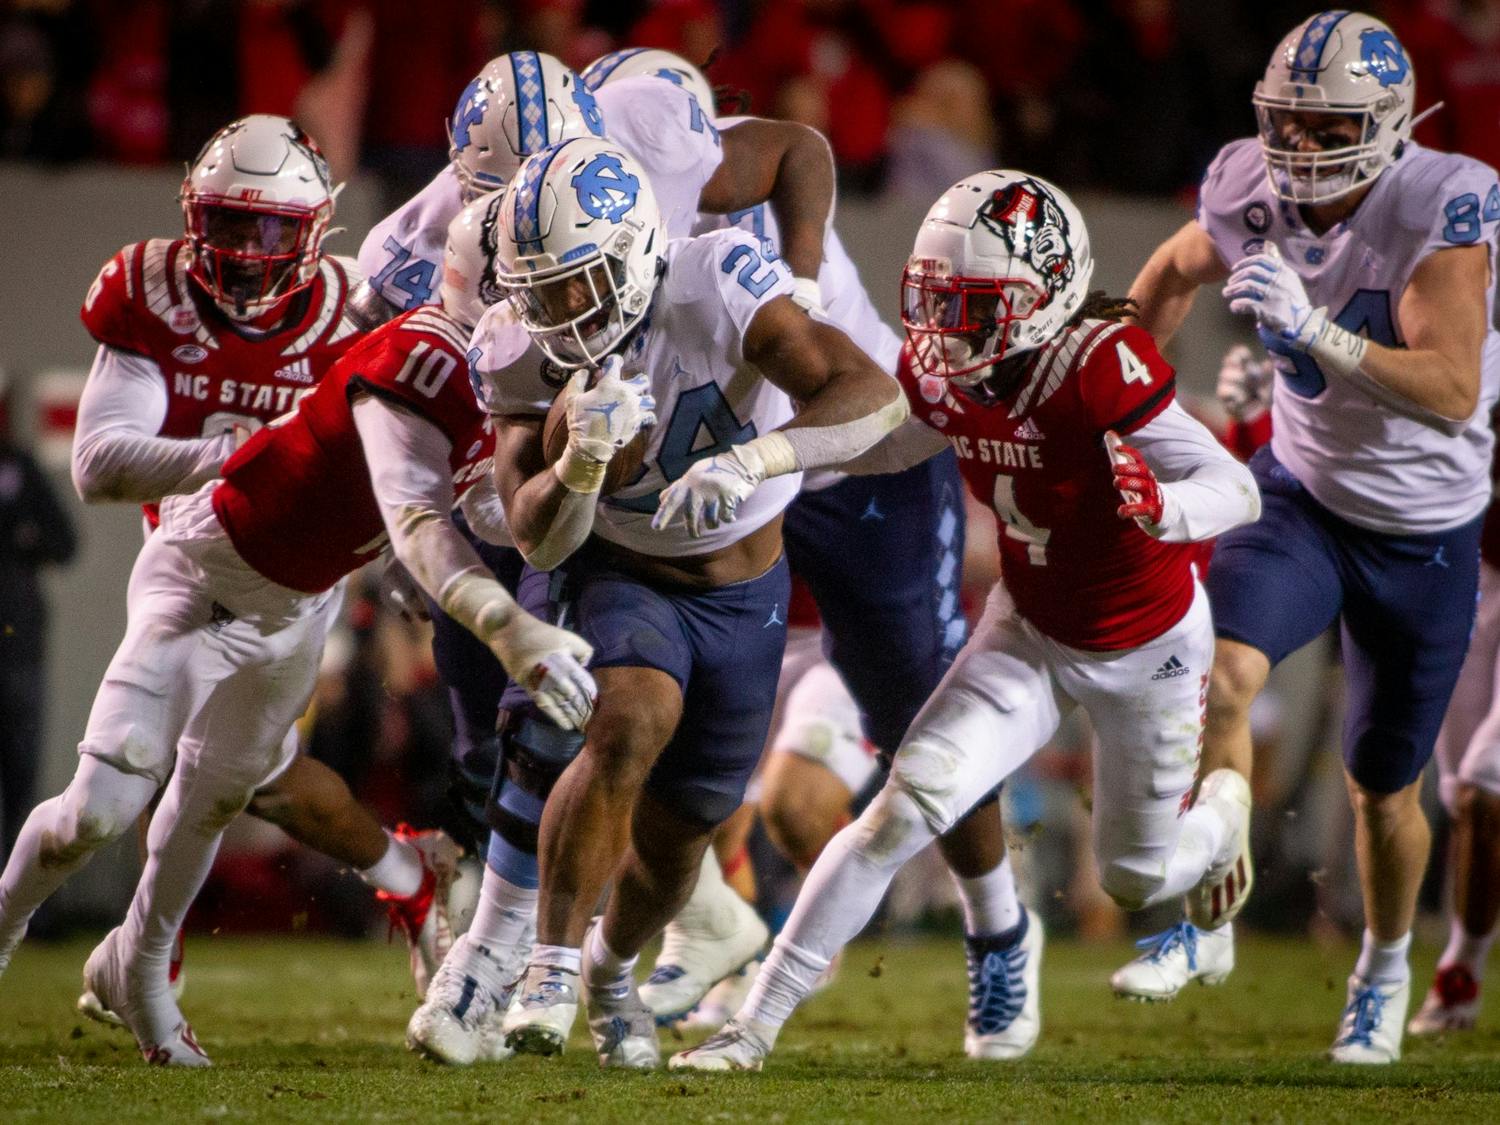 UNC senior running back British Brooks (24) attemtps to sprint past the defensive line during the Tar Heels' football game against the N.C. State Wolfpack at Carter Finley Stadium in Raleigh, NC, on Friday, Nov. 26, 2021. UNC lost 34-30.